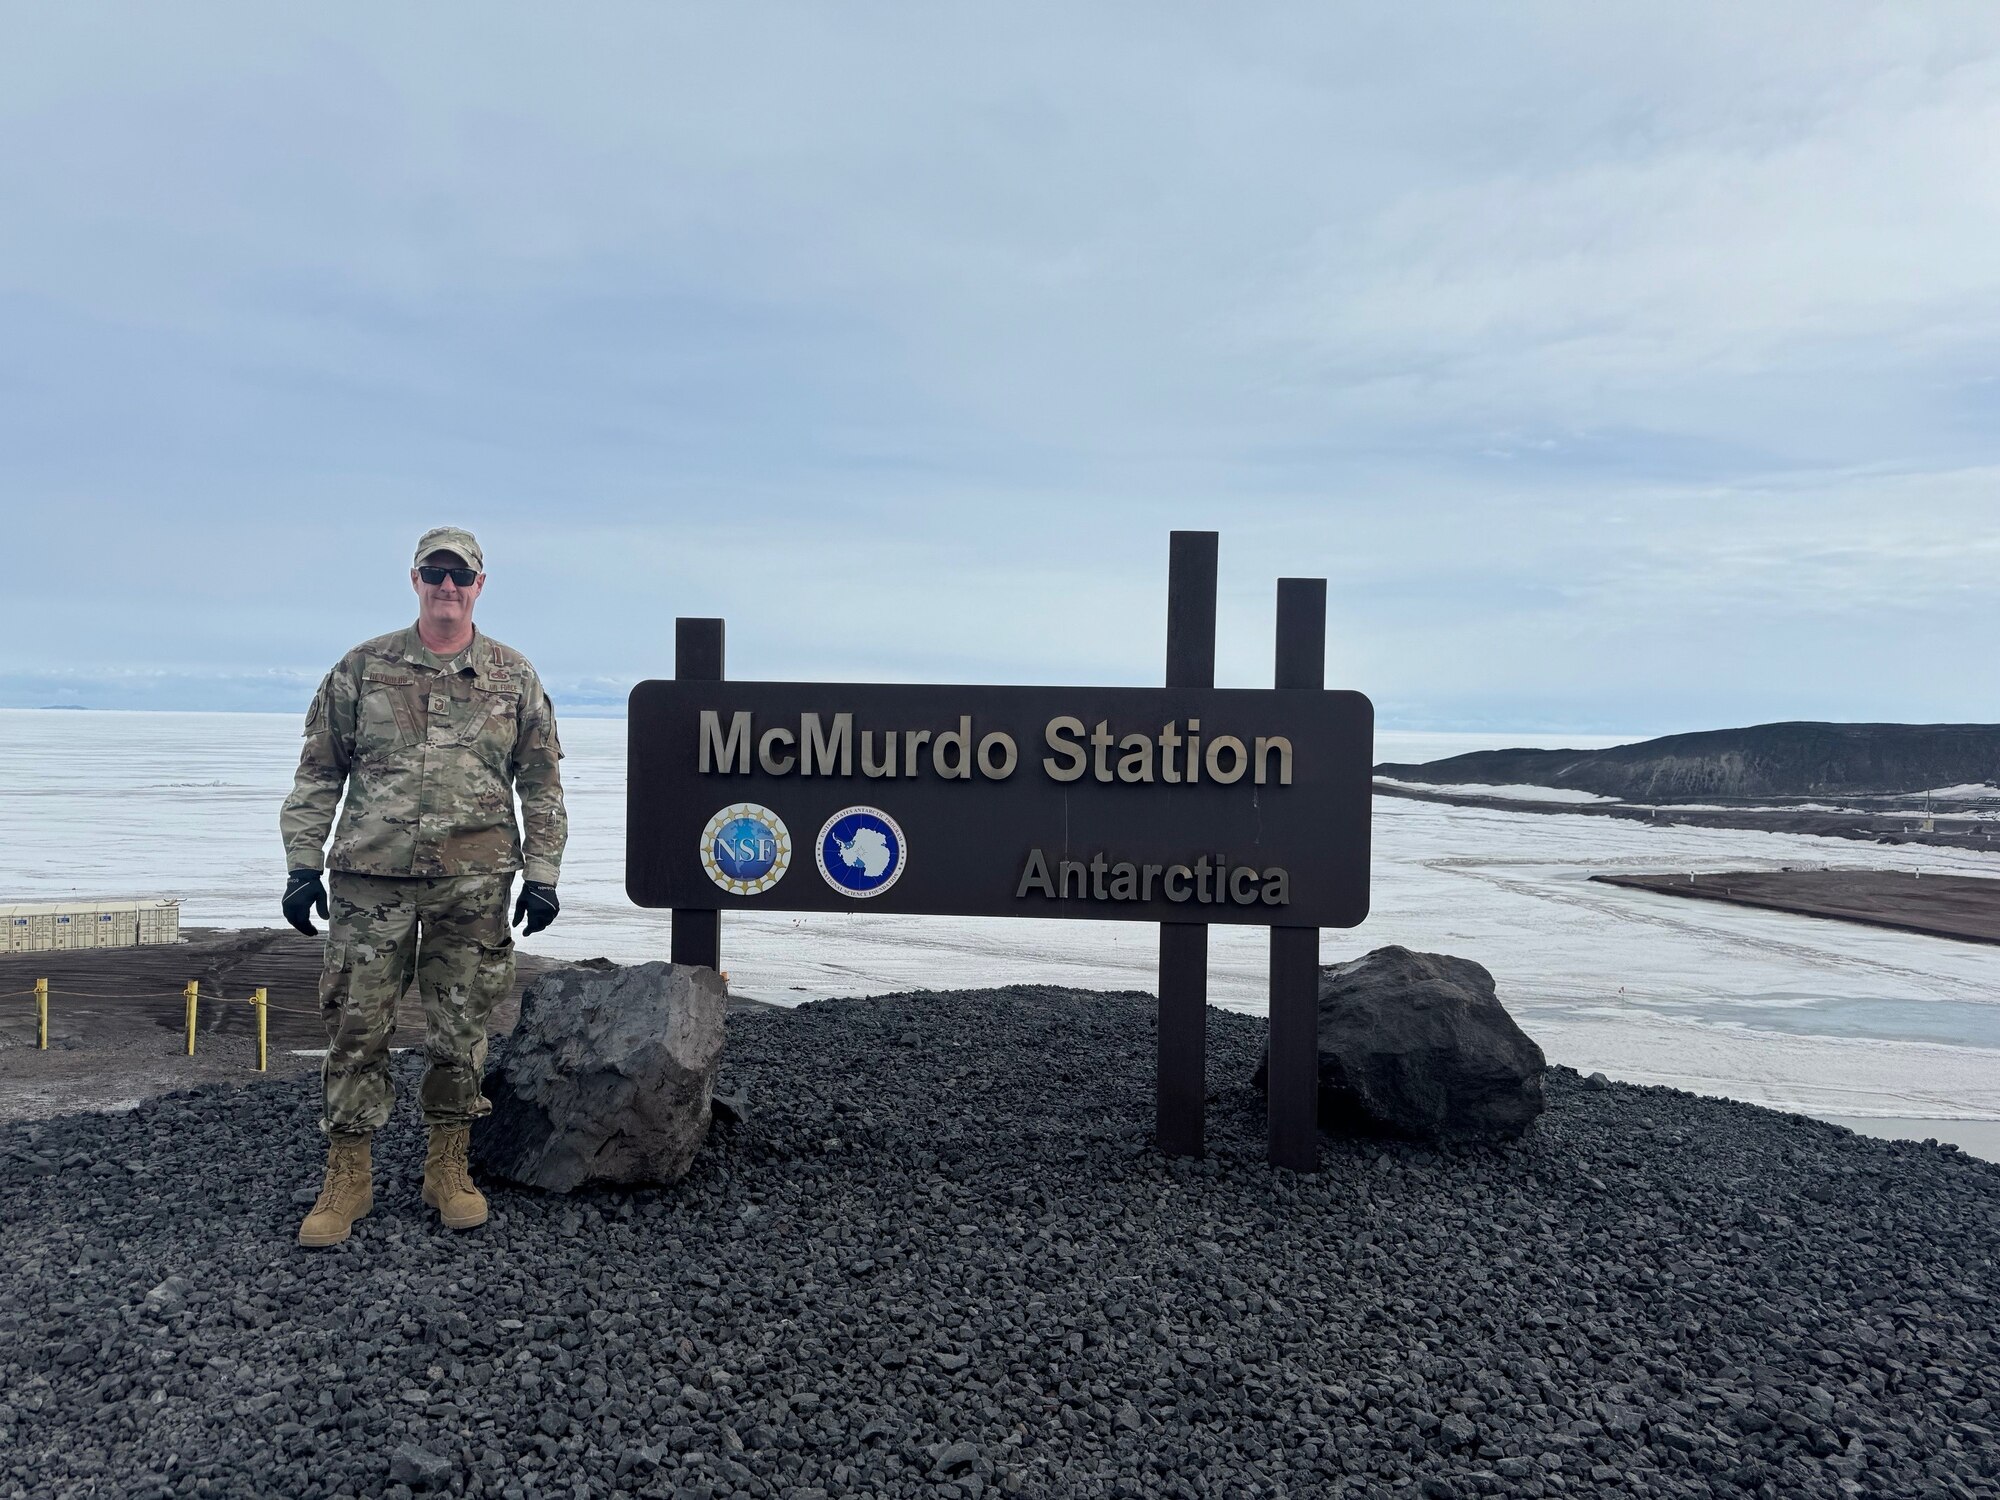 Senior Master Sgt. Jeff Reynolds, 142nd Wing Weapons Safety Manager, poses for a photo at McMurdo Station, Antarctica in December 2023. Reynolds served in a safety manager role there from December to January supporting Operation Deep Freeze, a joint Department of Defense mission to resupply the station in support of the National Science Foundation's research. (Courtesy photo)